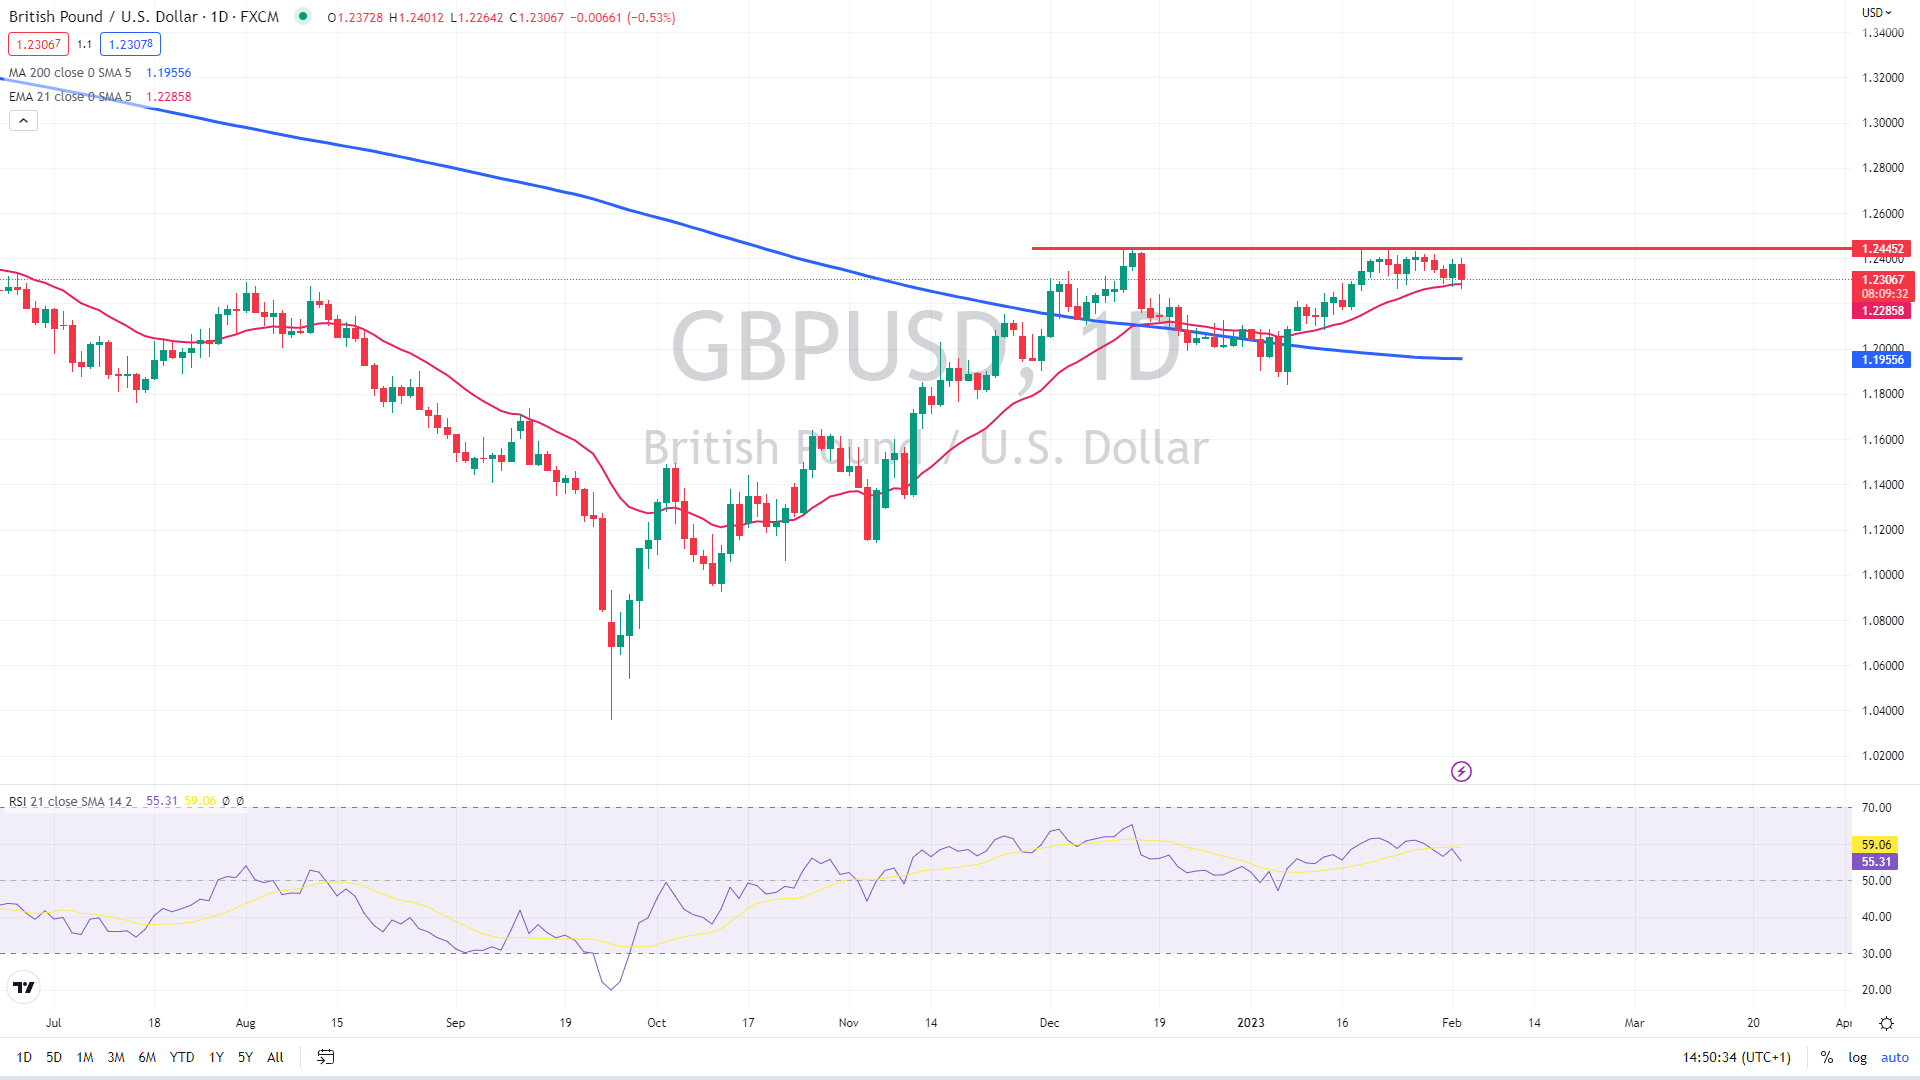 GBP/USD index daily chart